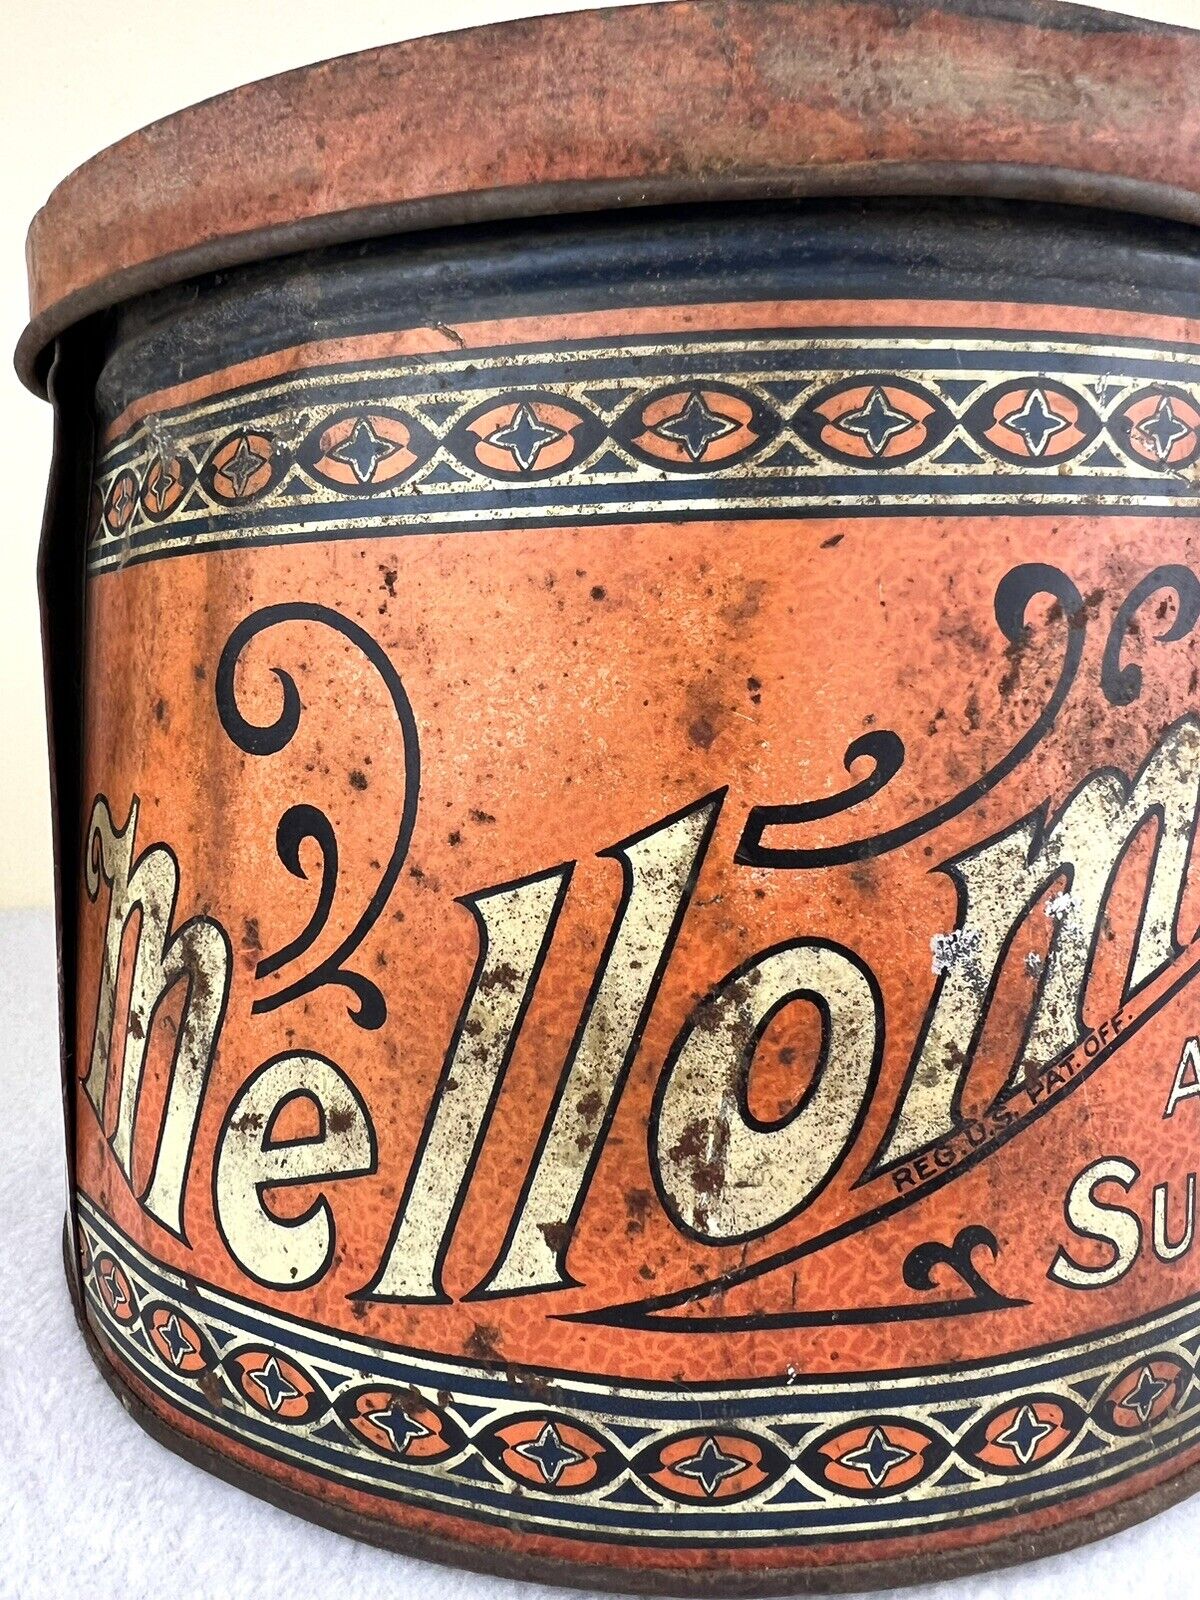 Vintage Mellomints 5 lb Orange Candy Tin “Absolutely Pure Sugar Confection” USA